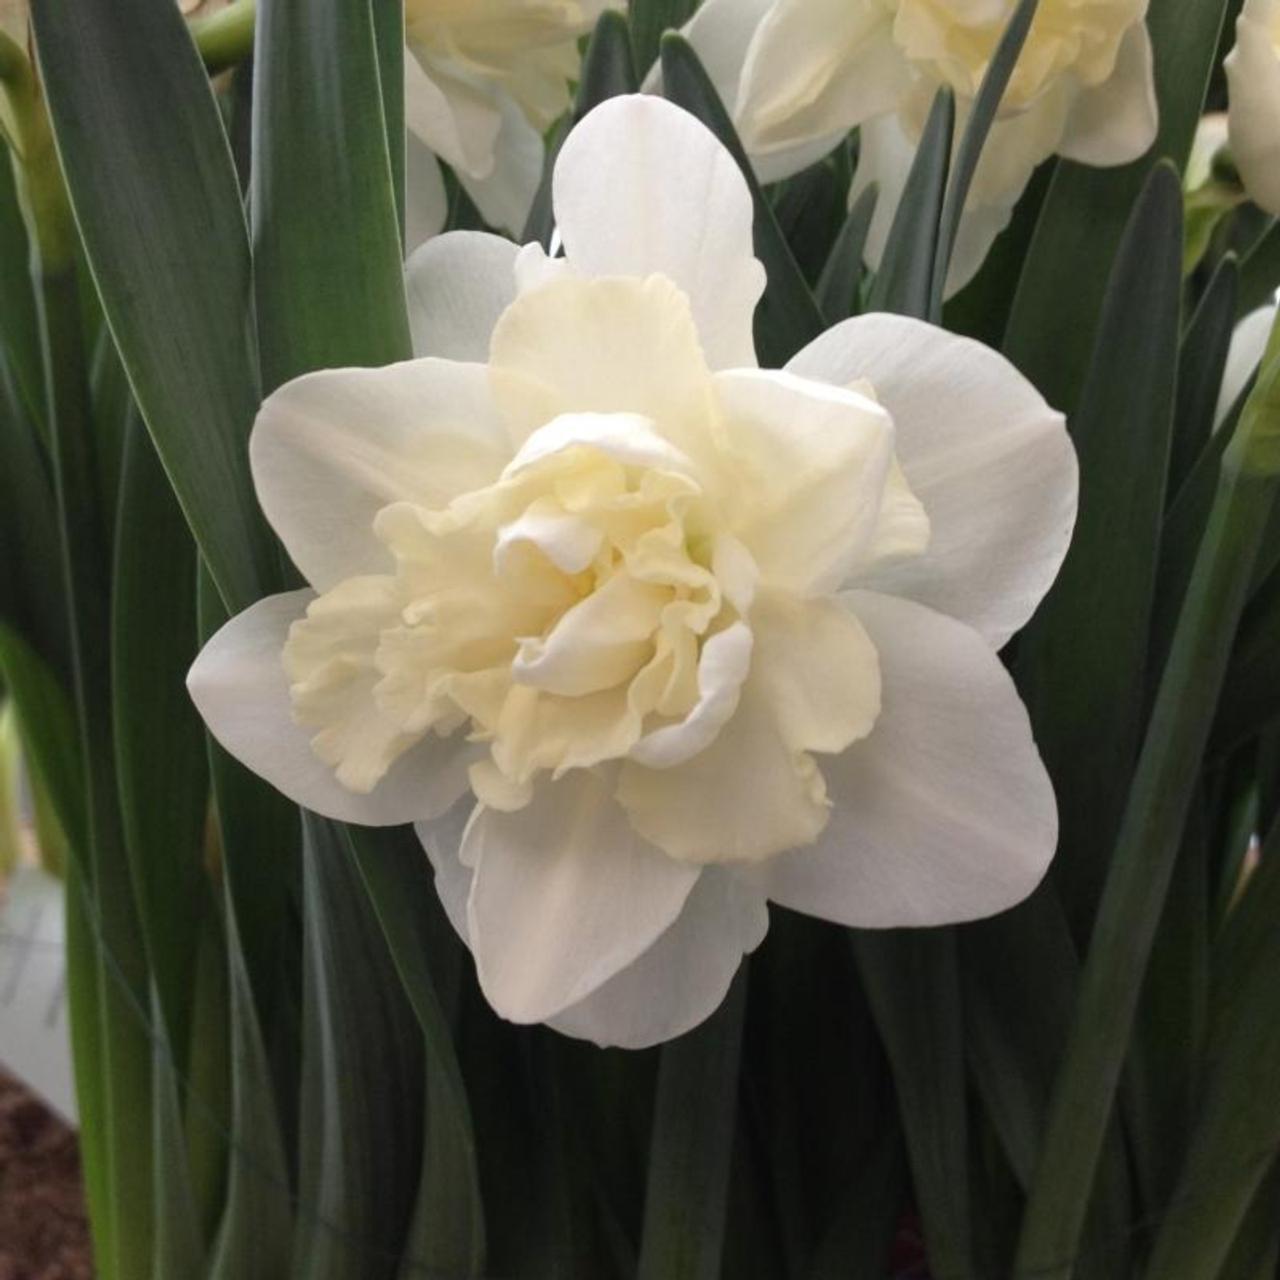 Narcissus 'Easter Born' plant